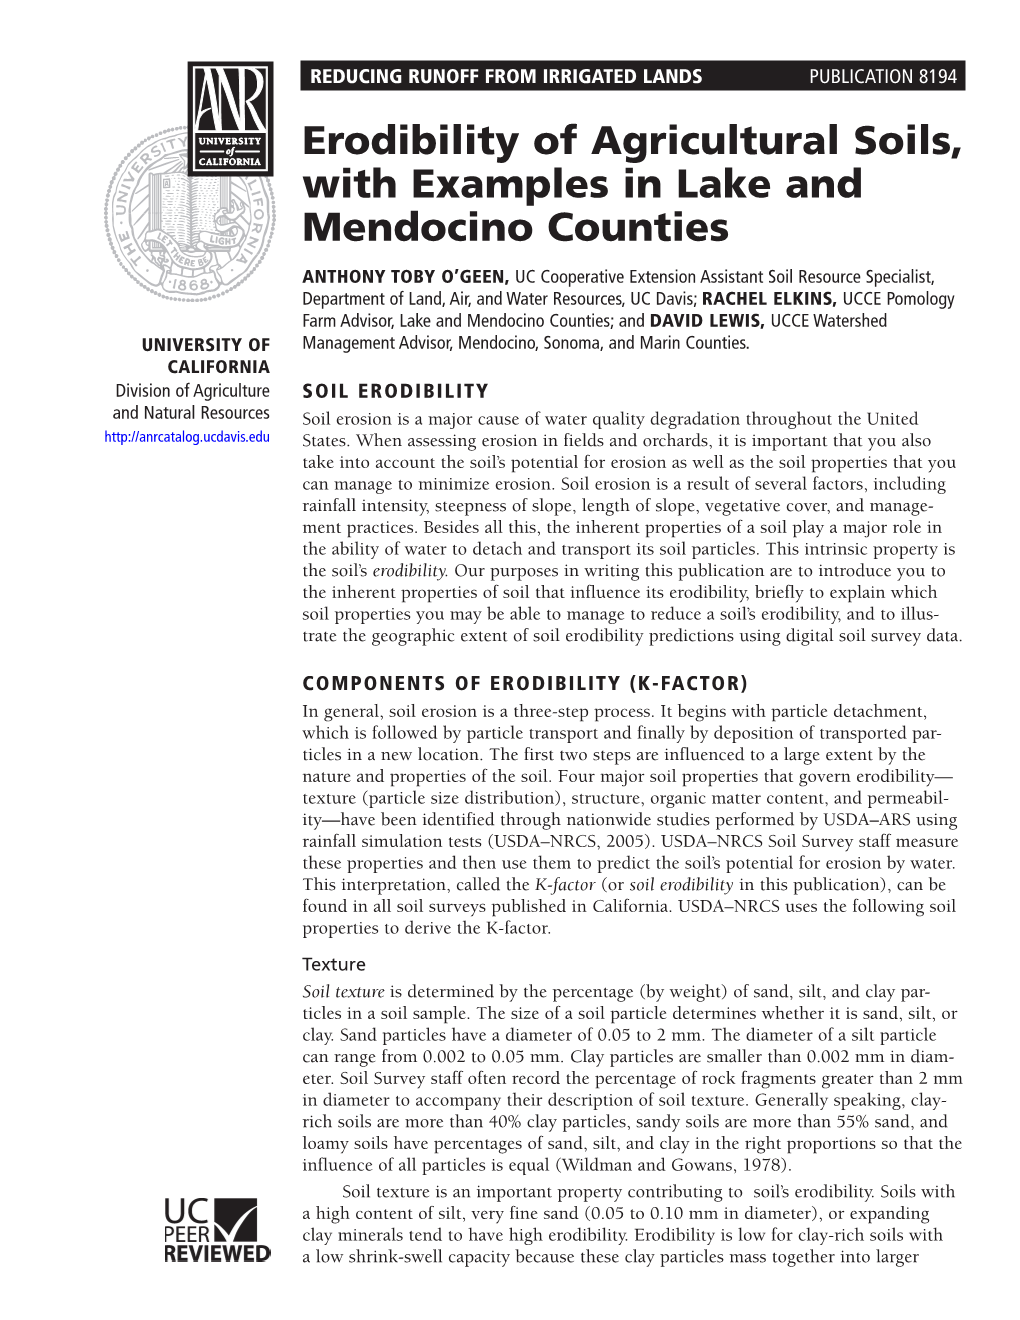 Erodibility of Agricultural Soils, with Examples in Lake and Mendocino